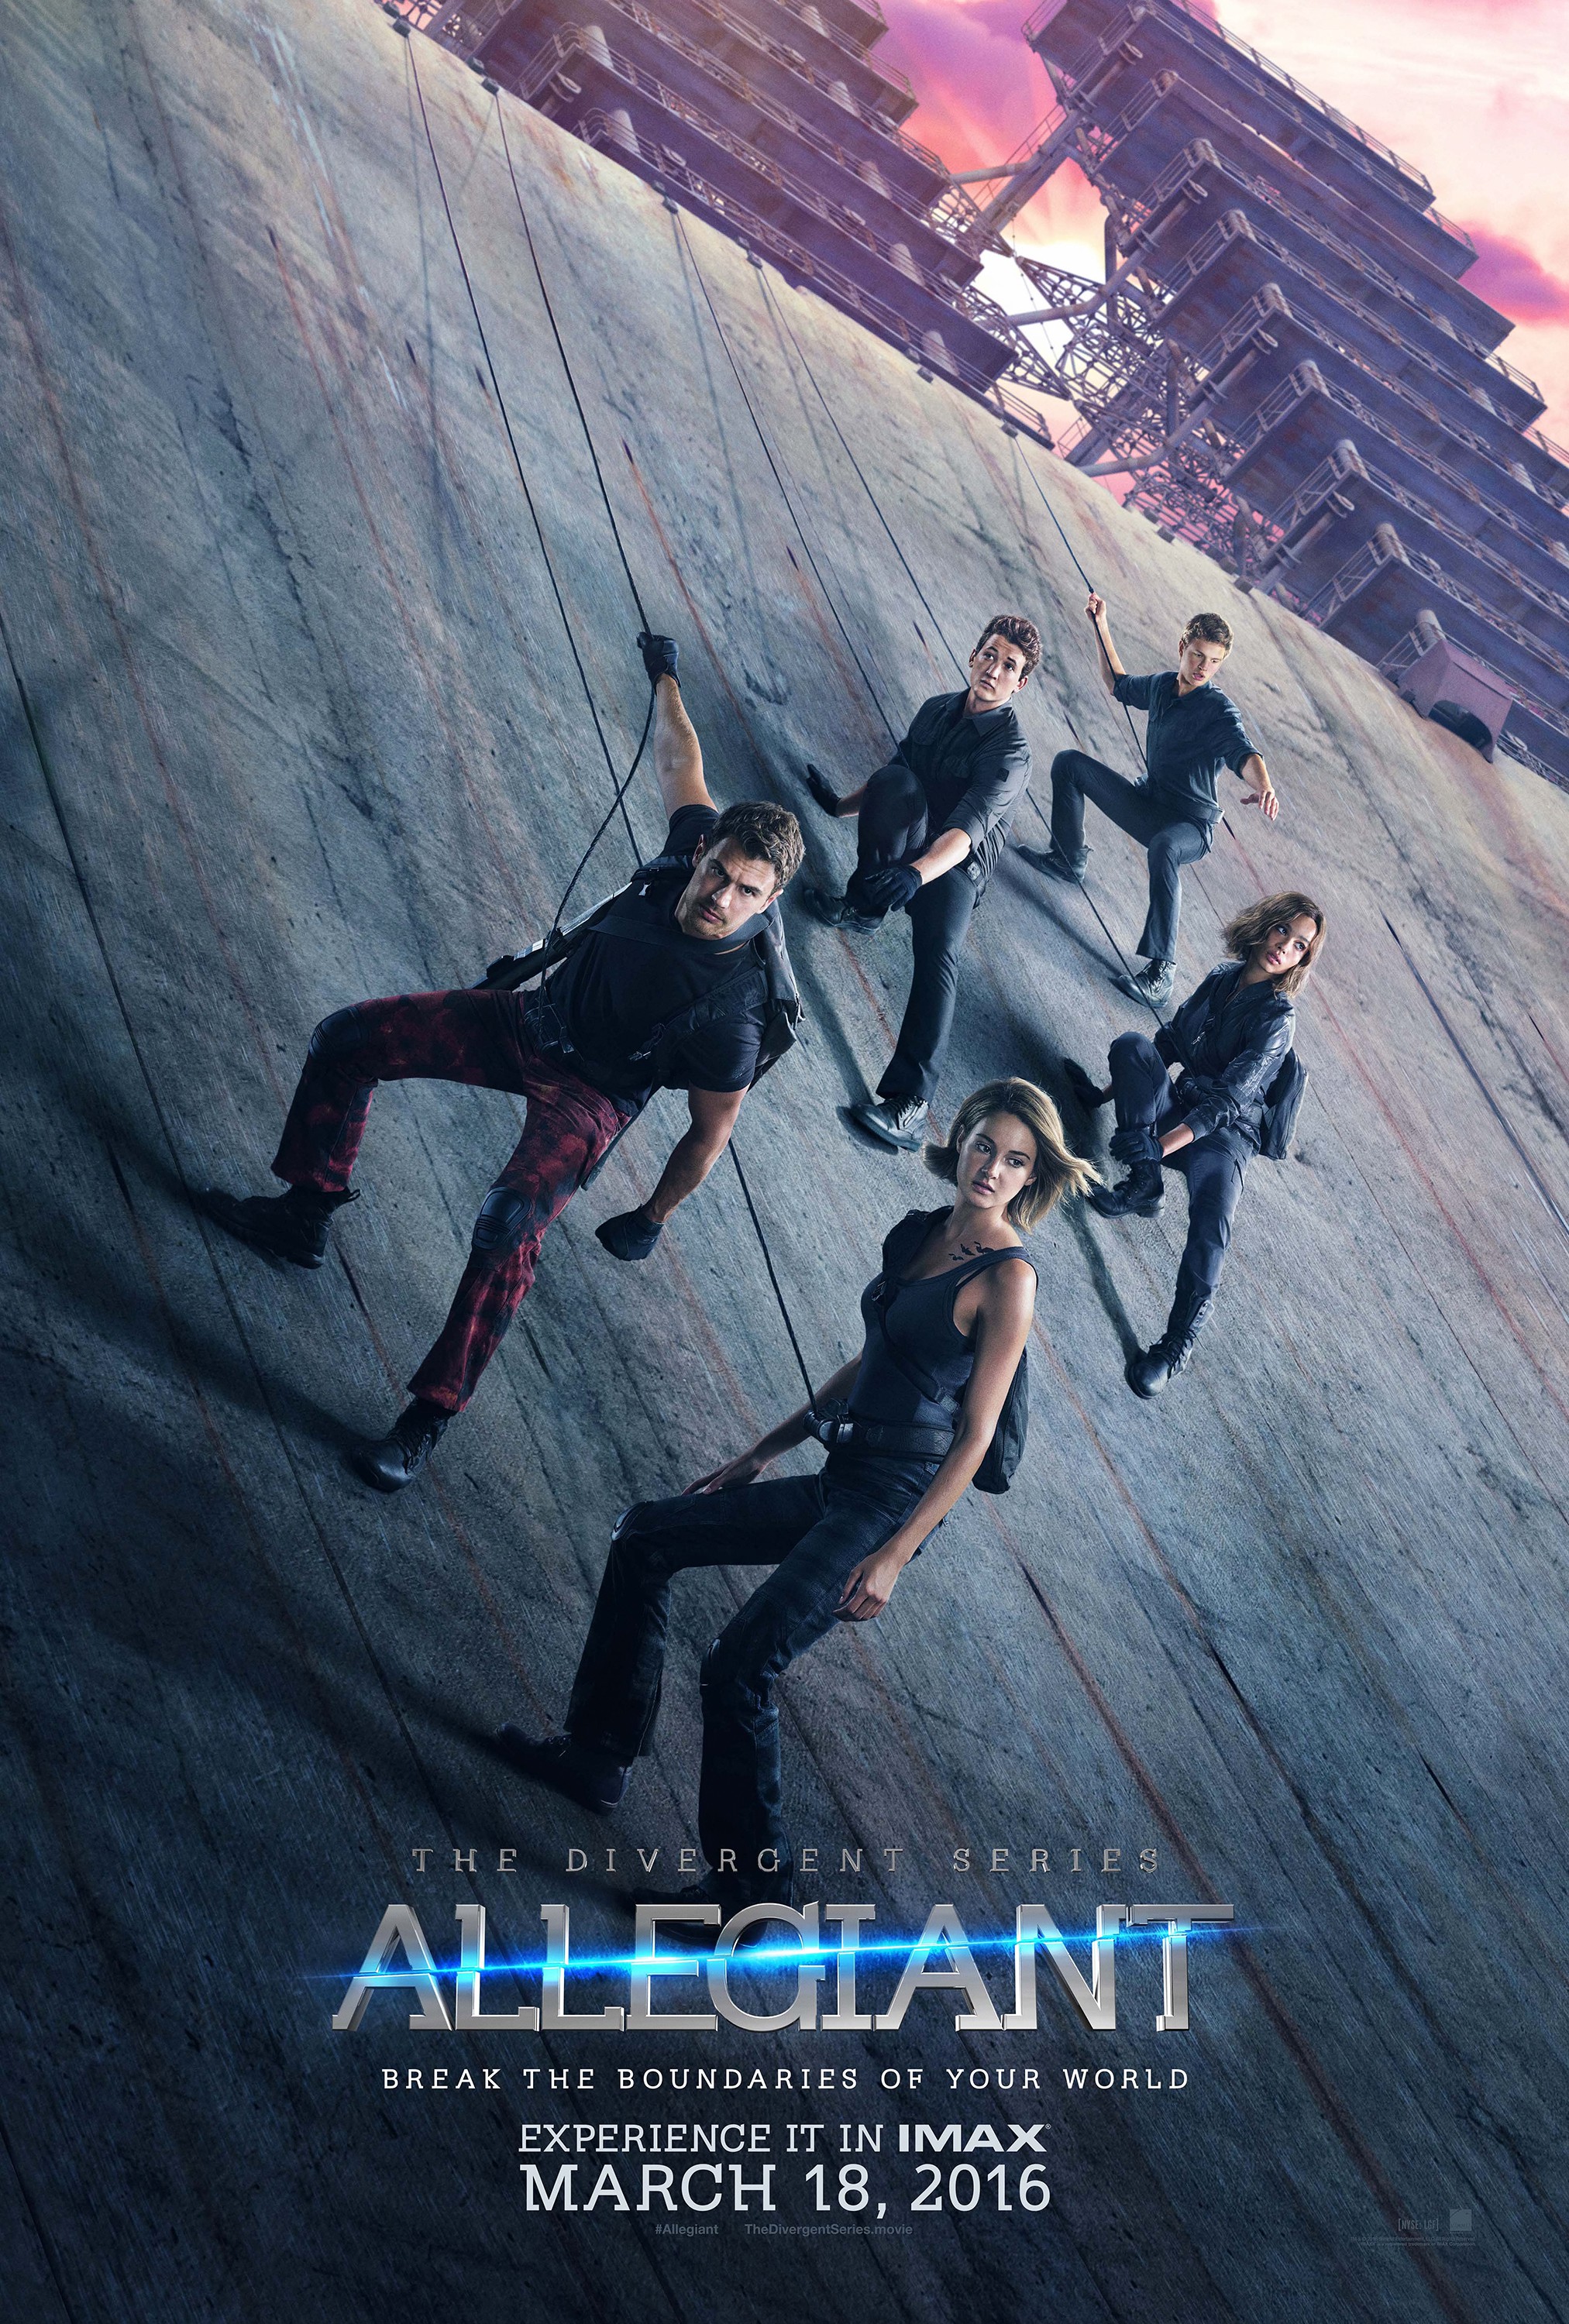 Mega Sized Movie Poster Image for The Divergent Series: Allegiant (#4 of 20)